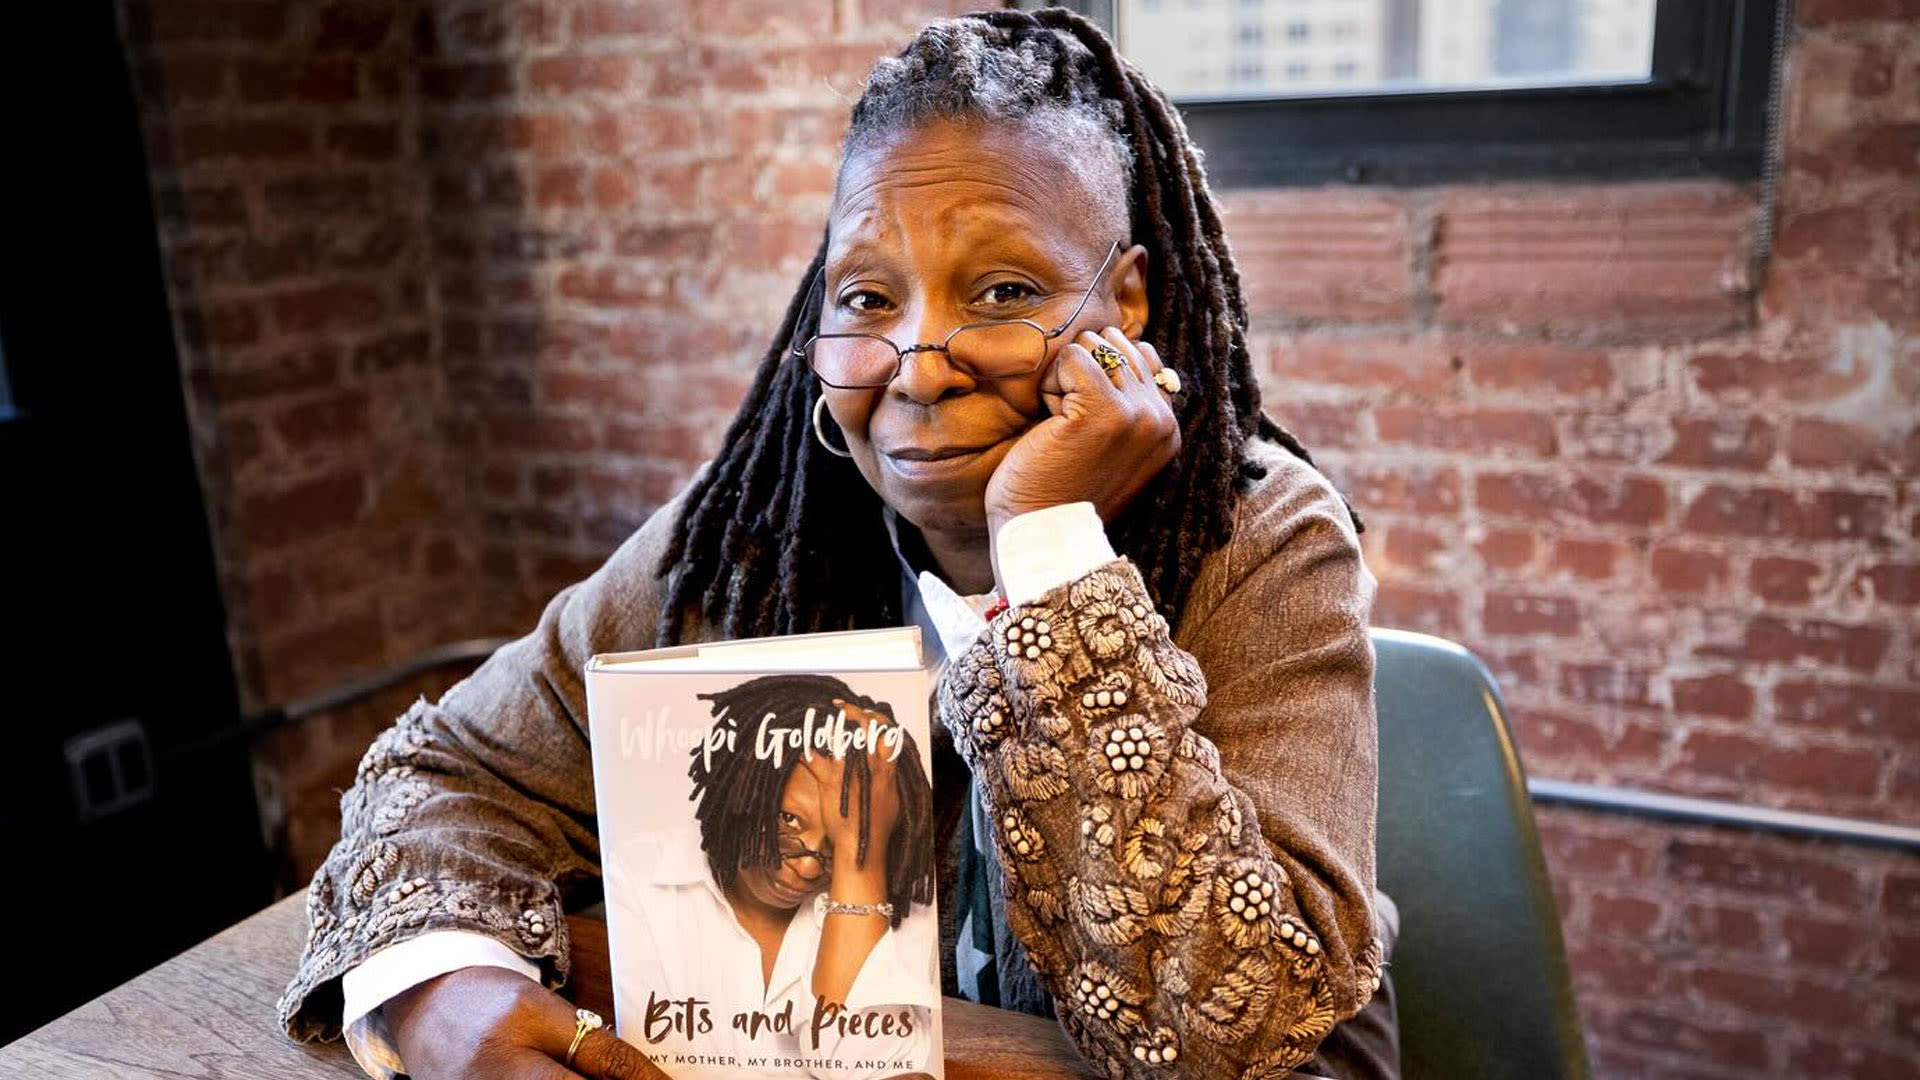 Whoopi Goldberg claims she saved her mother from suicide in new memoir